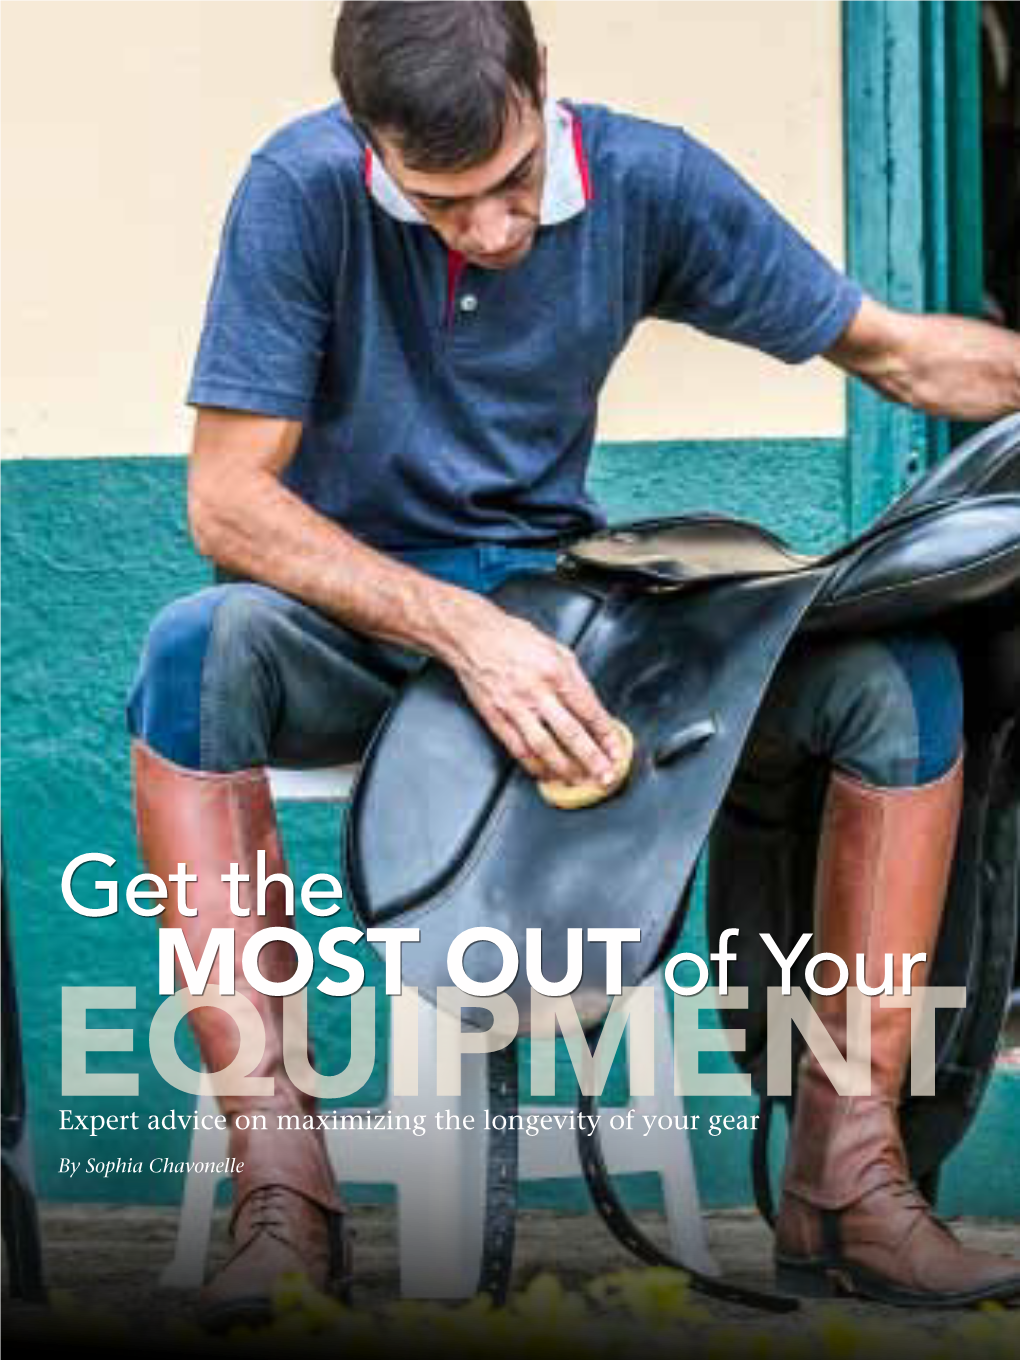 Get the Most out of Your EQUIPMENT Expert Advice on Maximizing the Longevity of Your Gear